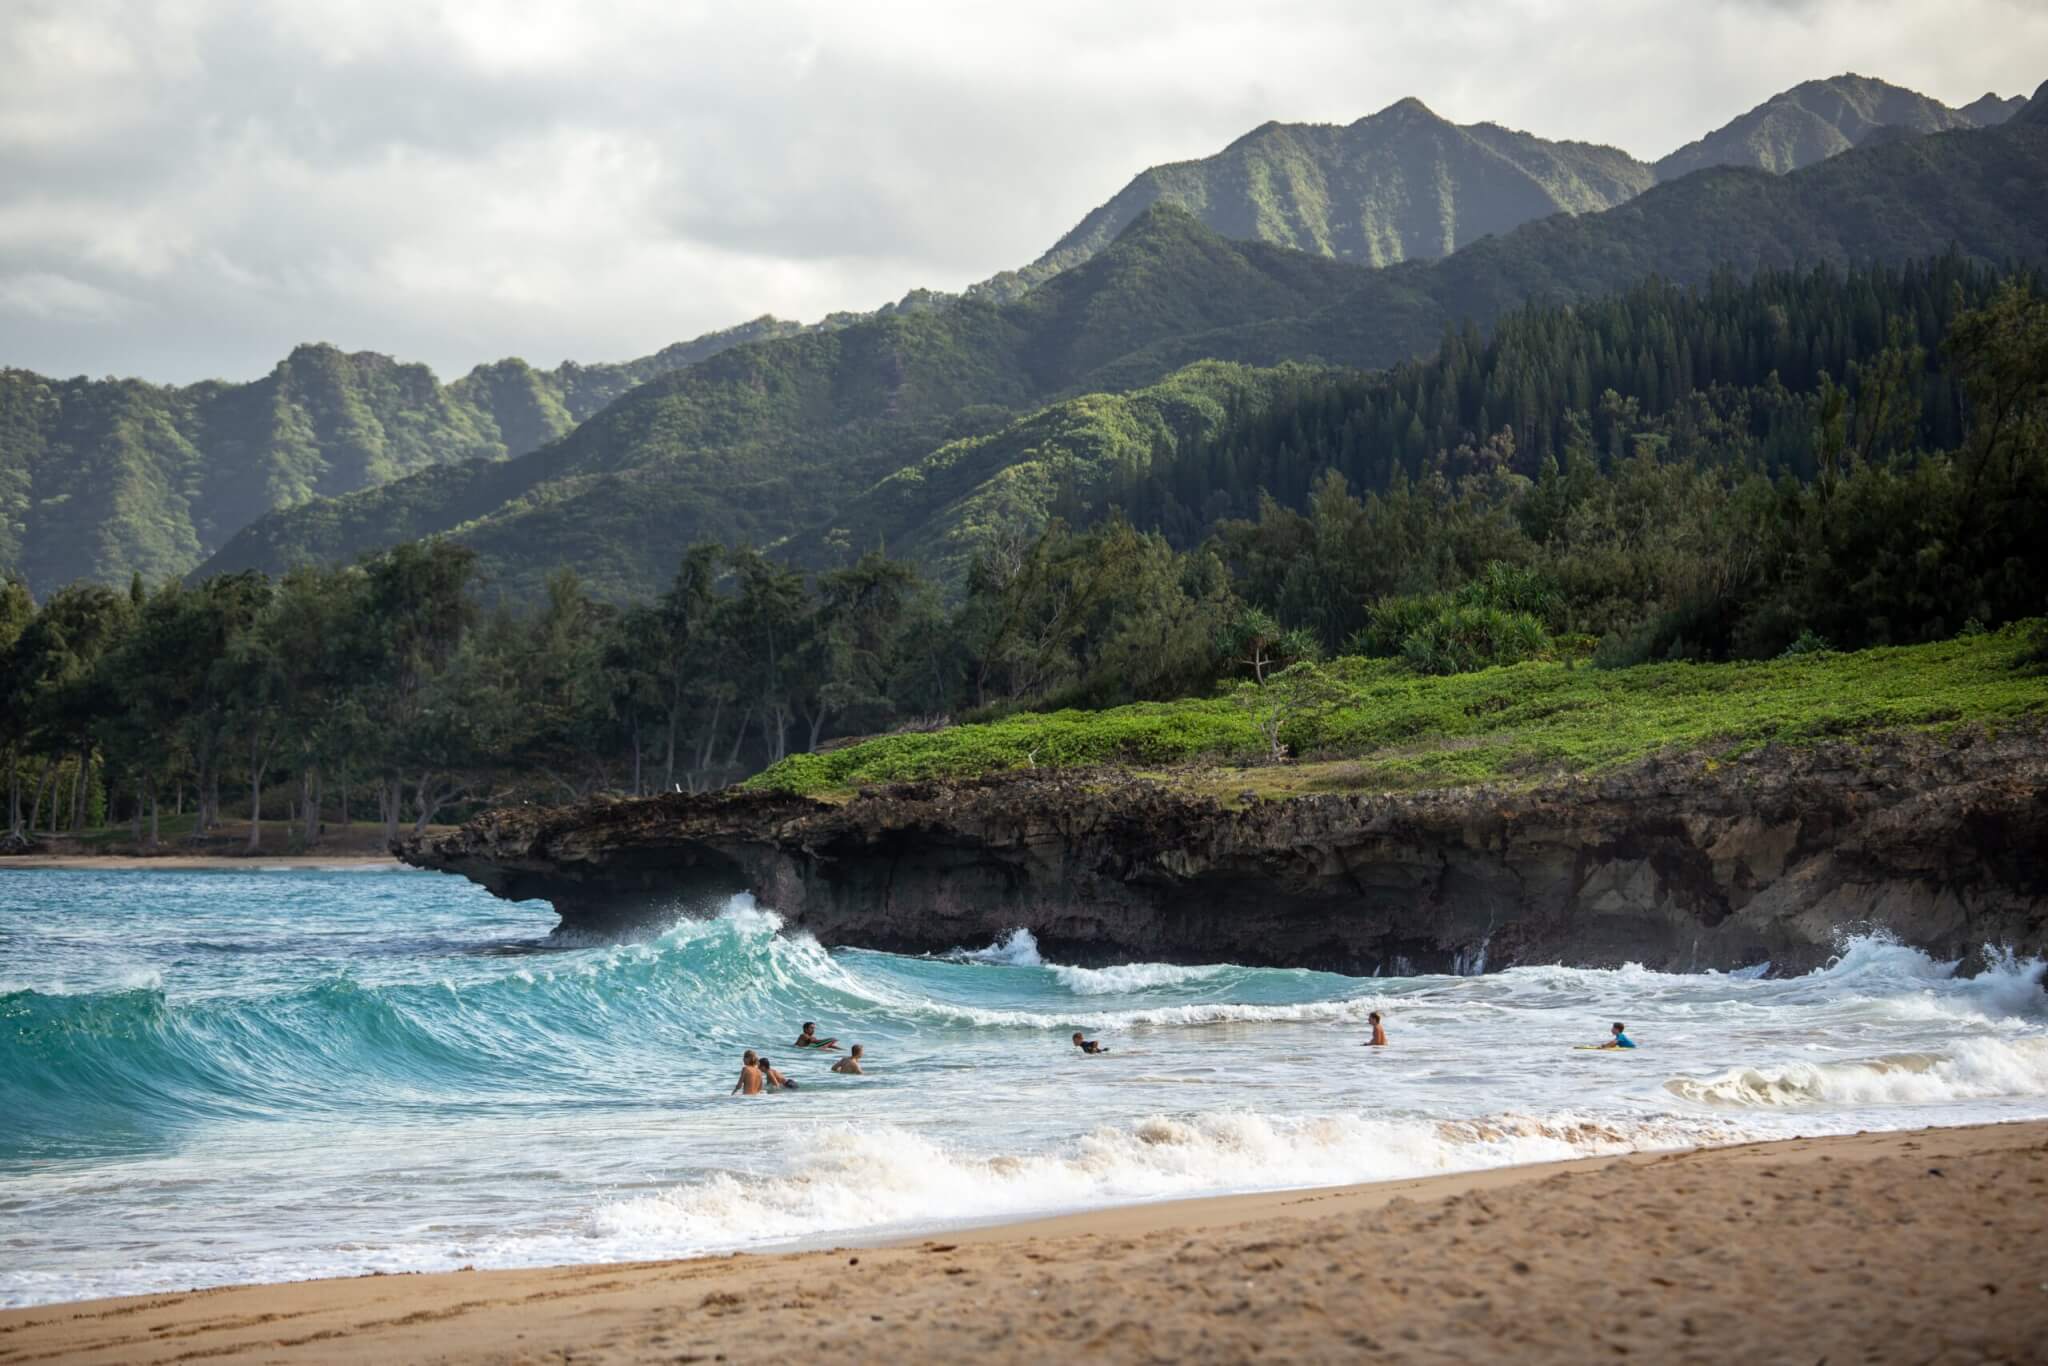 Road tripping around Oahu, the smaller northern beaches are great to catch some sun and watch local surfers